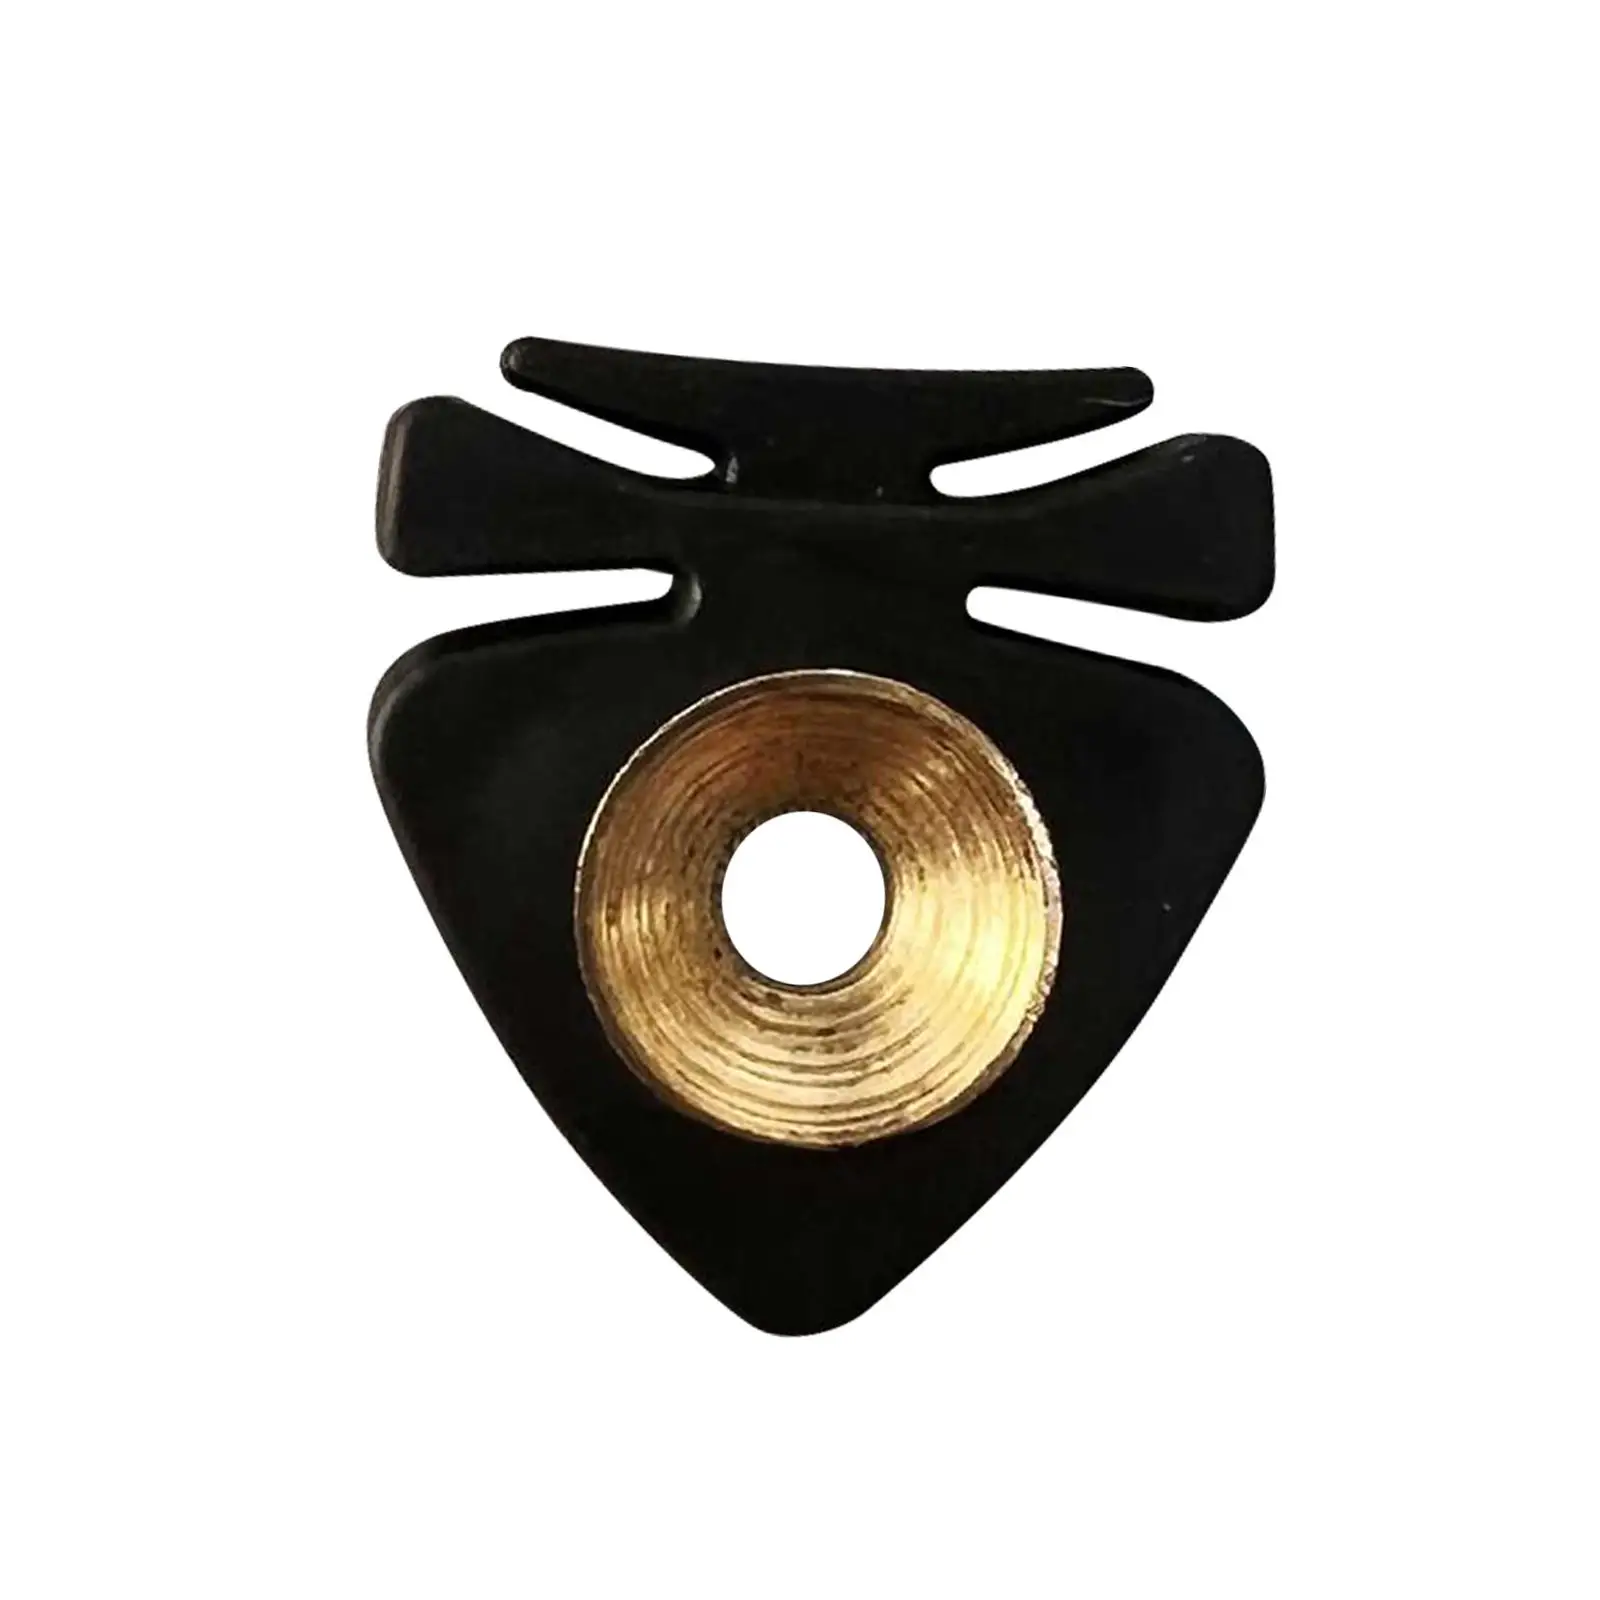 Violin Mute Easy Installation Universal Fittings Durable Portable Parts Lightweight Tool Silence for Musical Instrument Viola